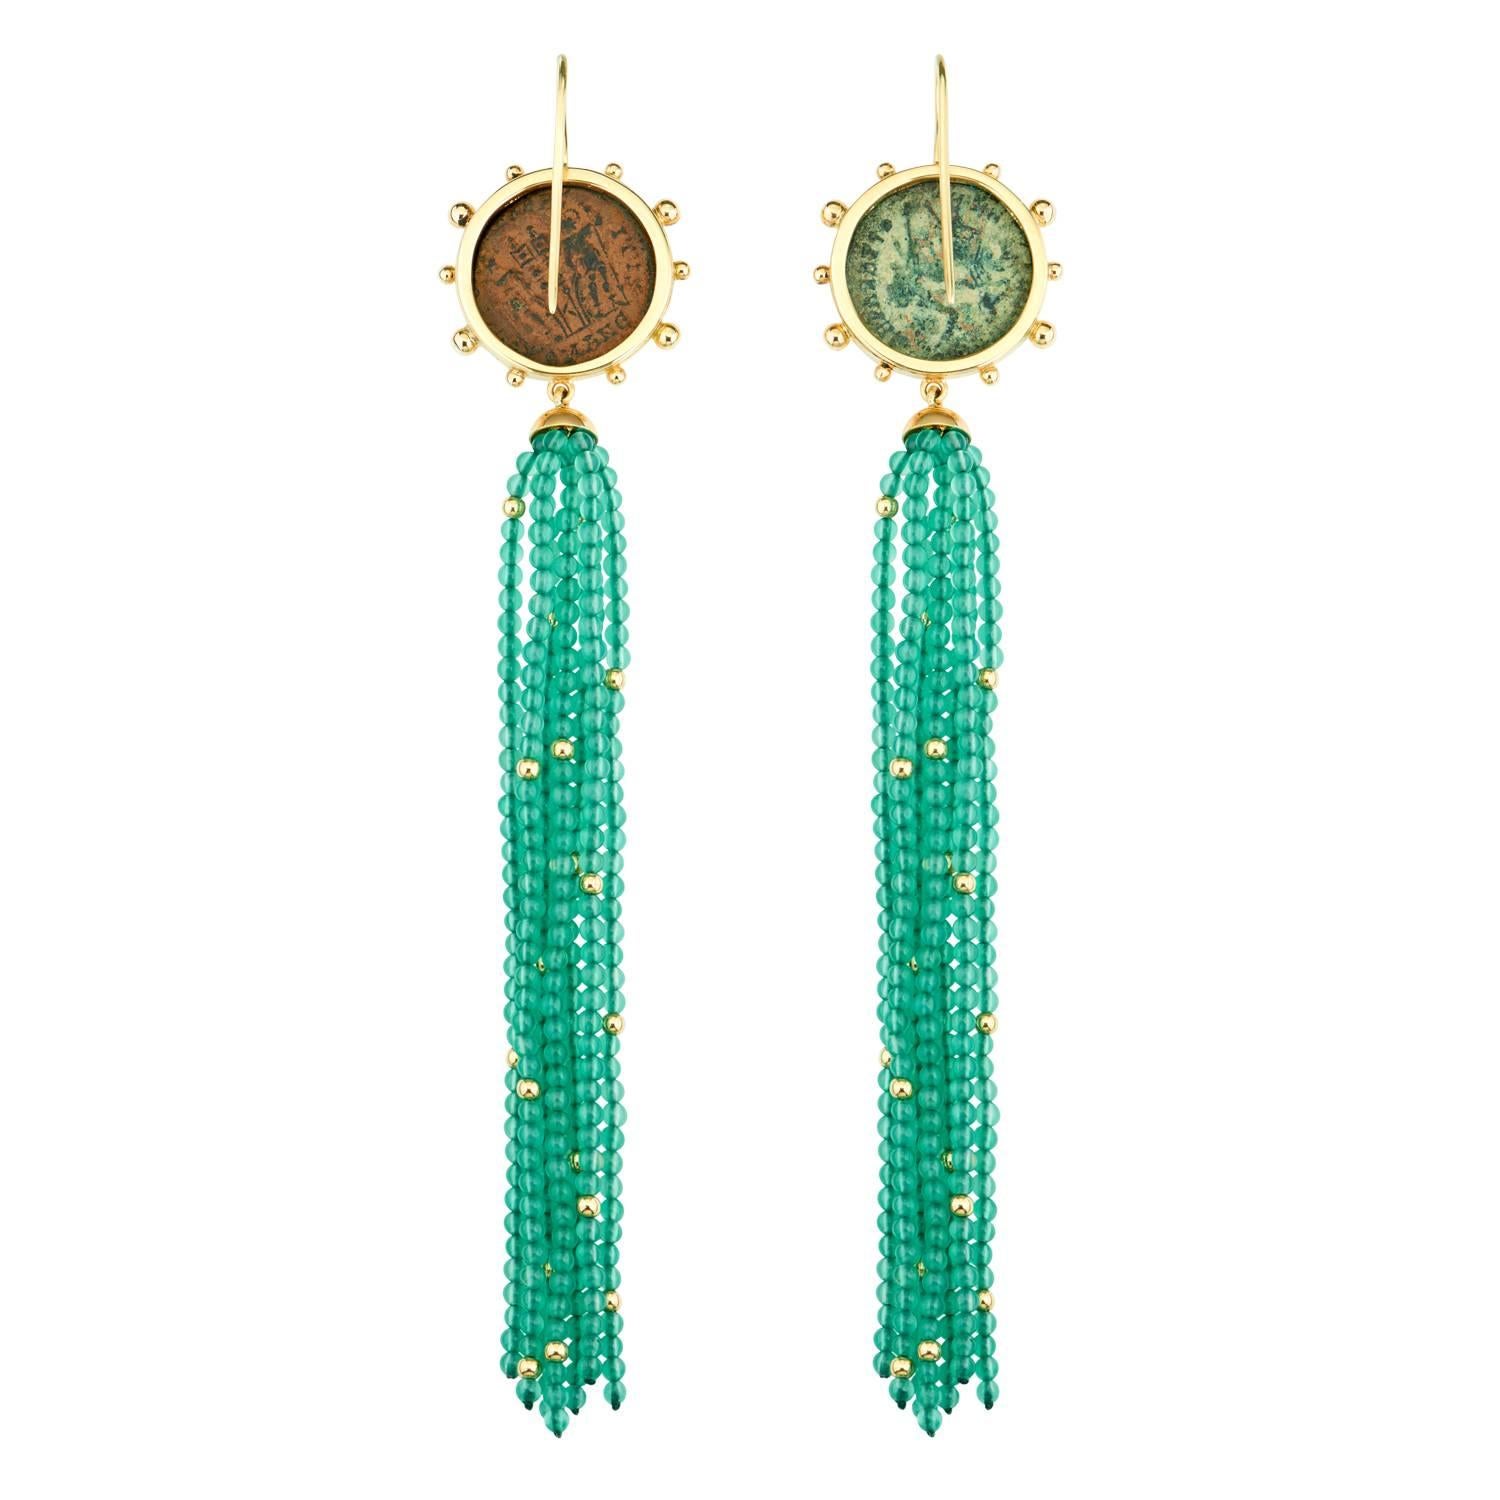 These Dubini coin earrings from the 'Empires' collection feature authentic Roman Imperial bronze coins set in 18K yellow gold with green agate and gold beaded tassel.

* Due to the unique process of hand carving coins in ancient times, there may be